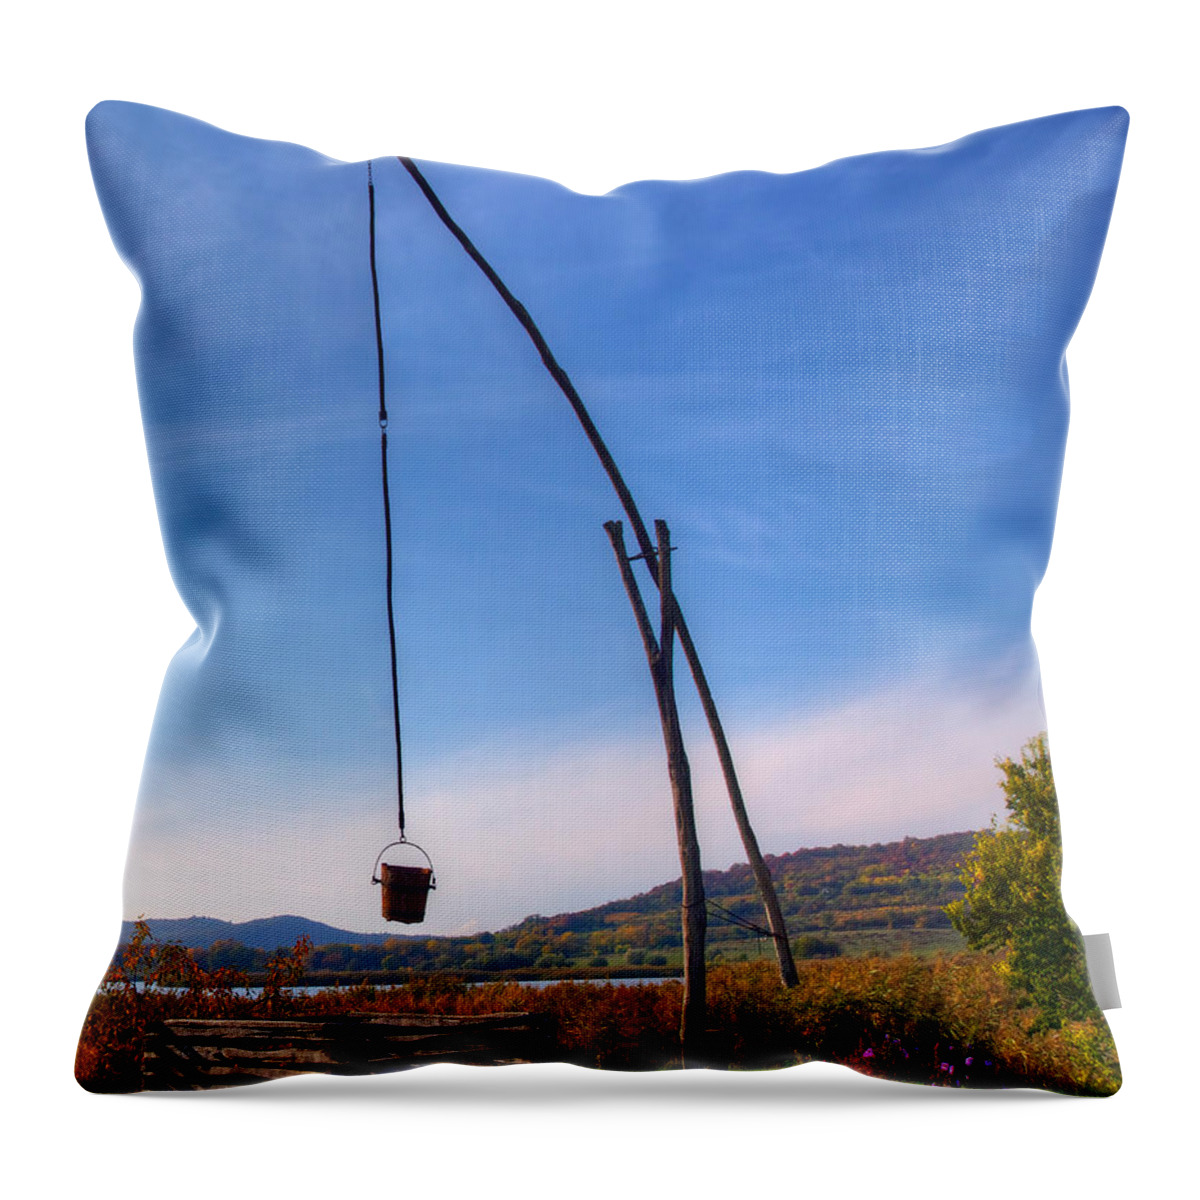 Well Throw Pillow featuring the photograph Hungarian Well by Peter Kennett